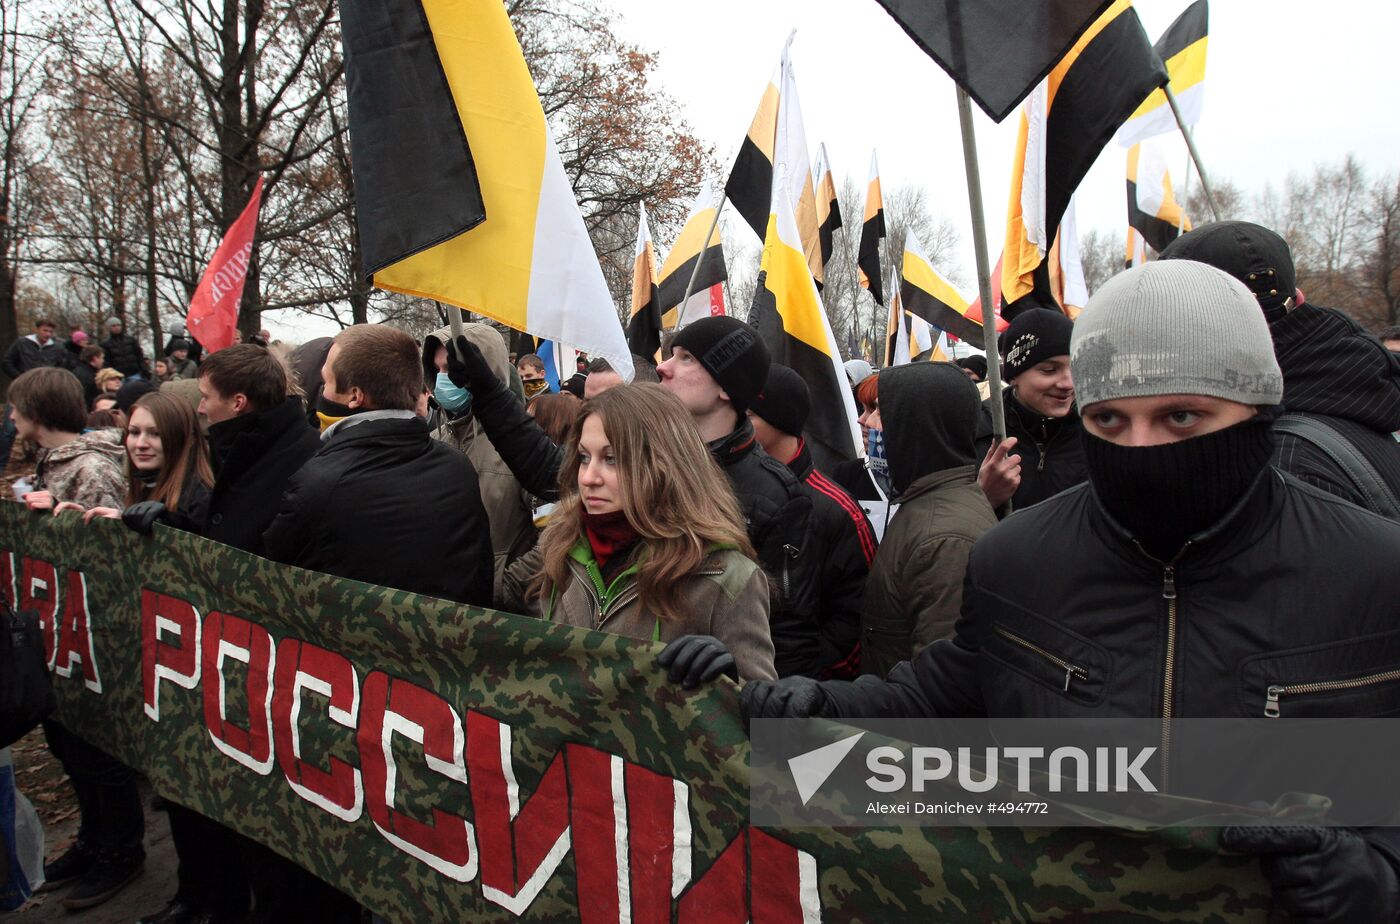 Nationalists hold Russian March rally in St. Petersburg